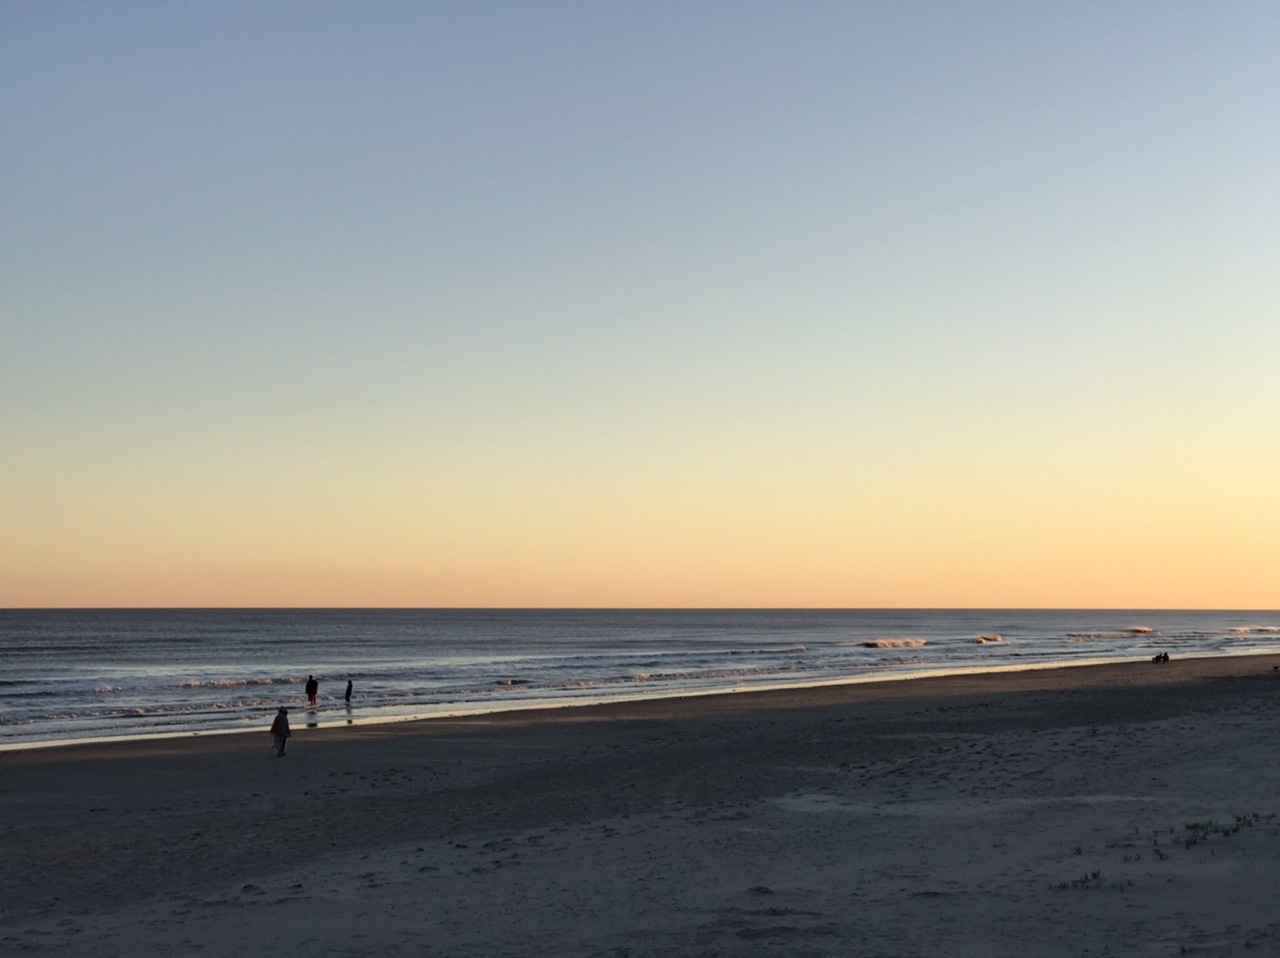 Galveston Beach at sunset.  Photo taken by and the property of FourWalls.